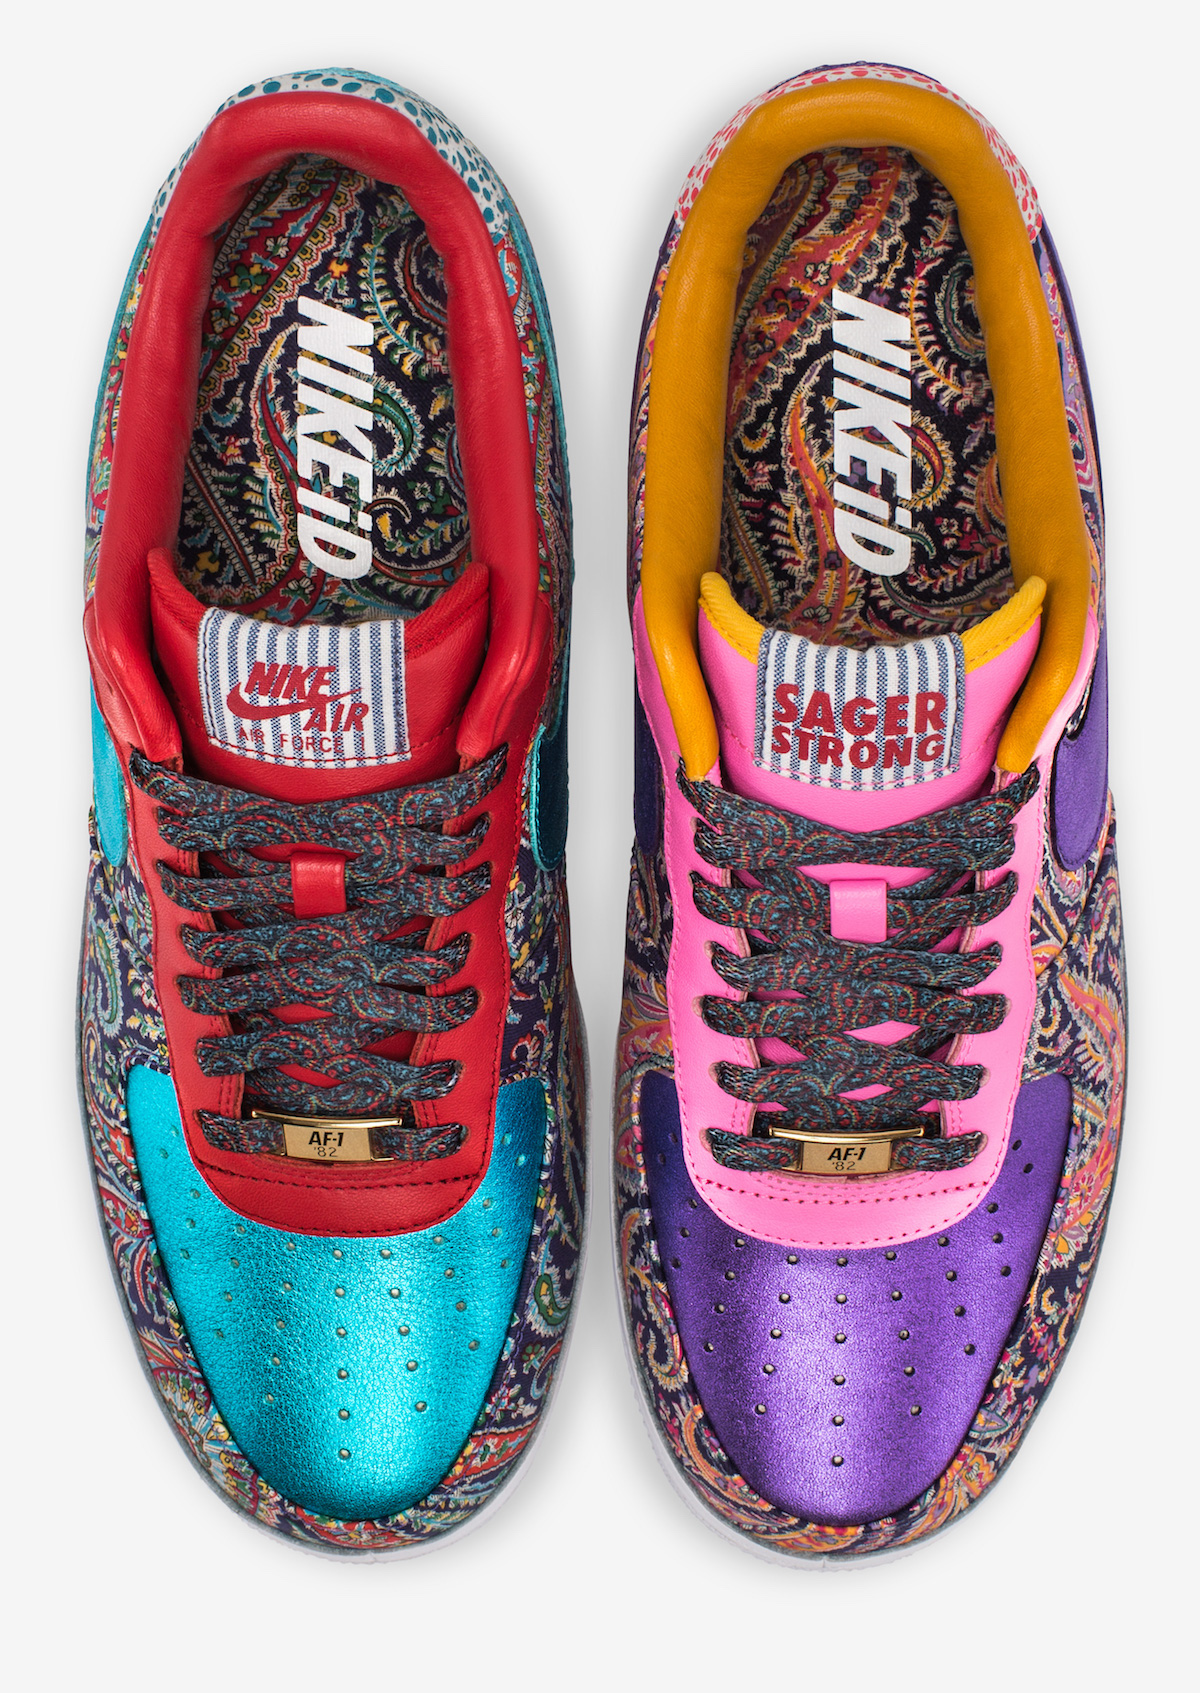 SagerStrong Nike Air Force One 